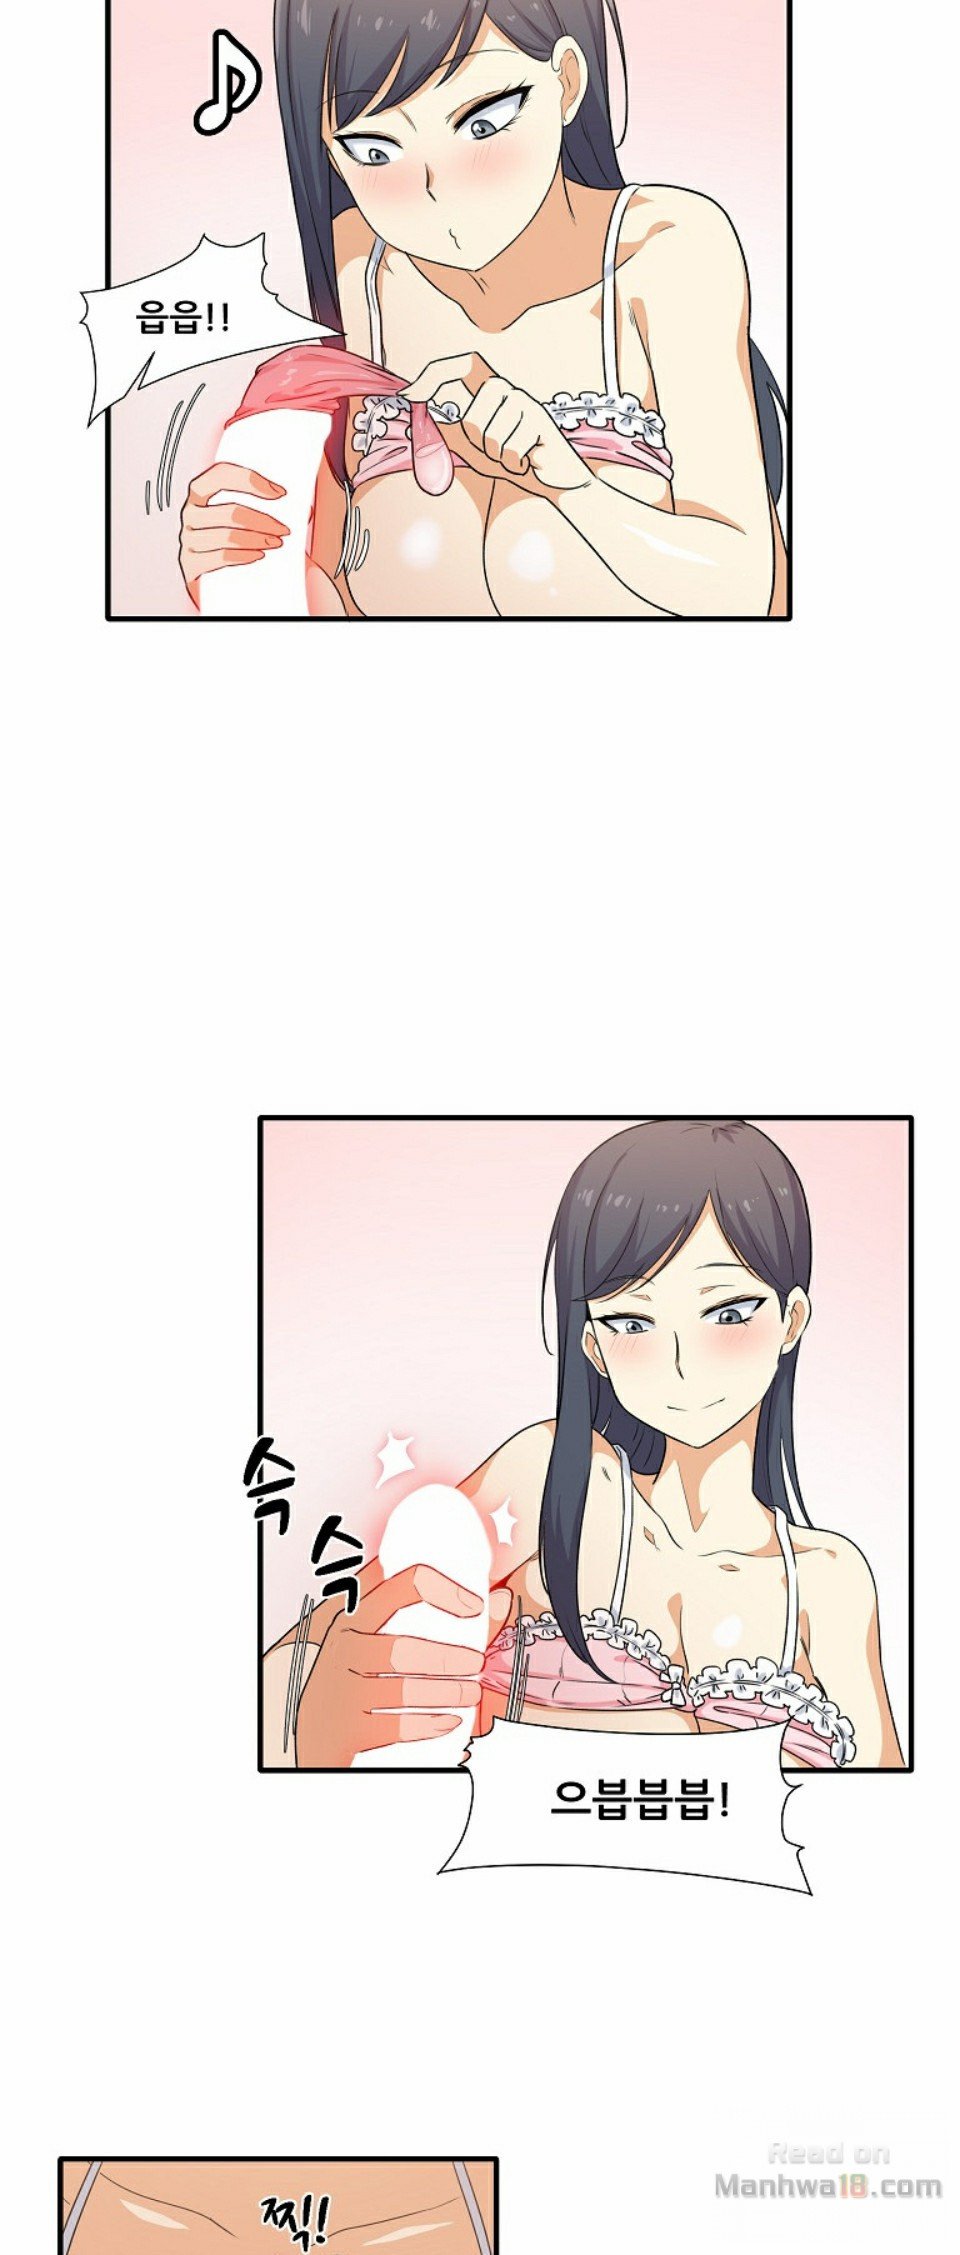 the-ark-is-me-raw-chap-3-18